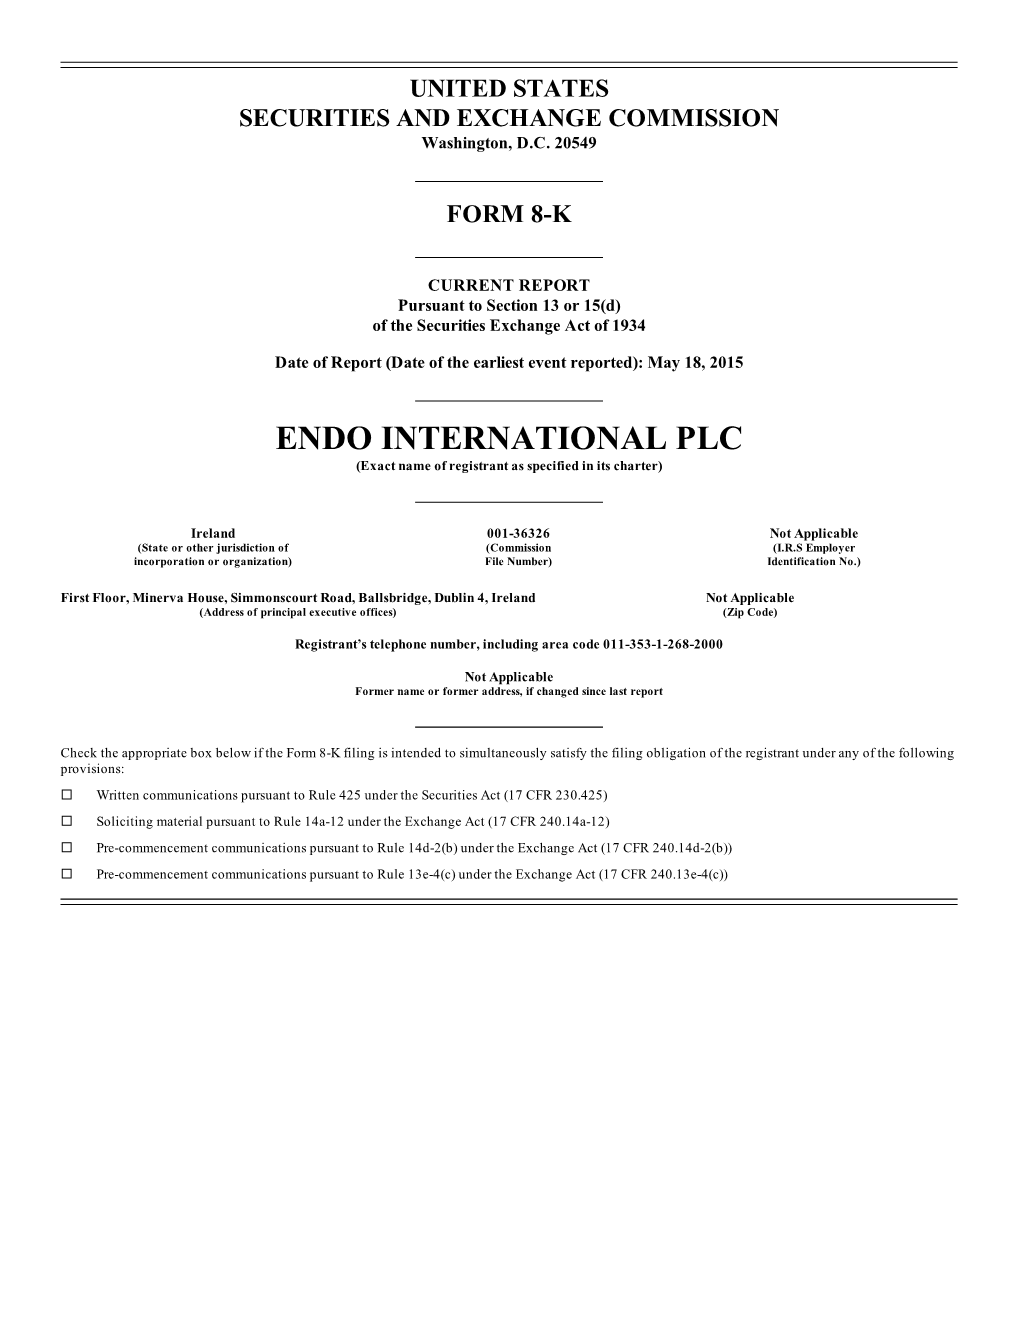 ENDO INTERNATIONAL PLC (Exact Name of Registrant As Specified in Its Charter)